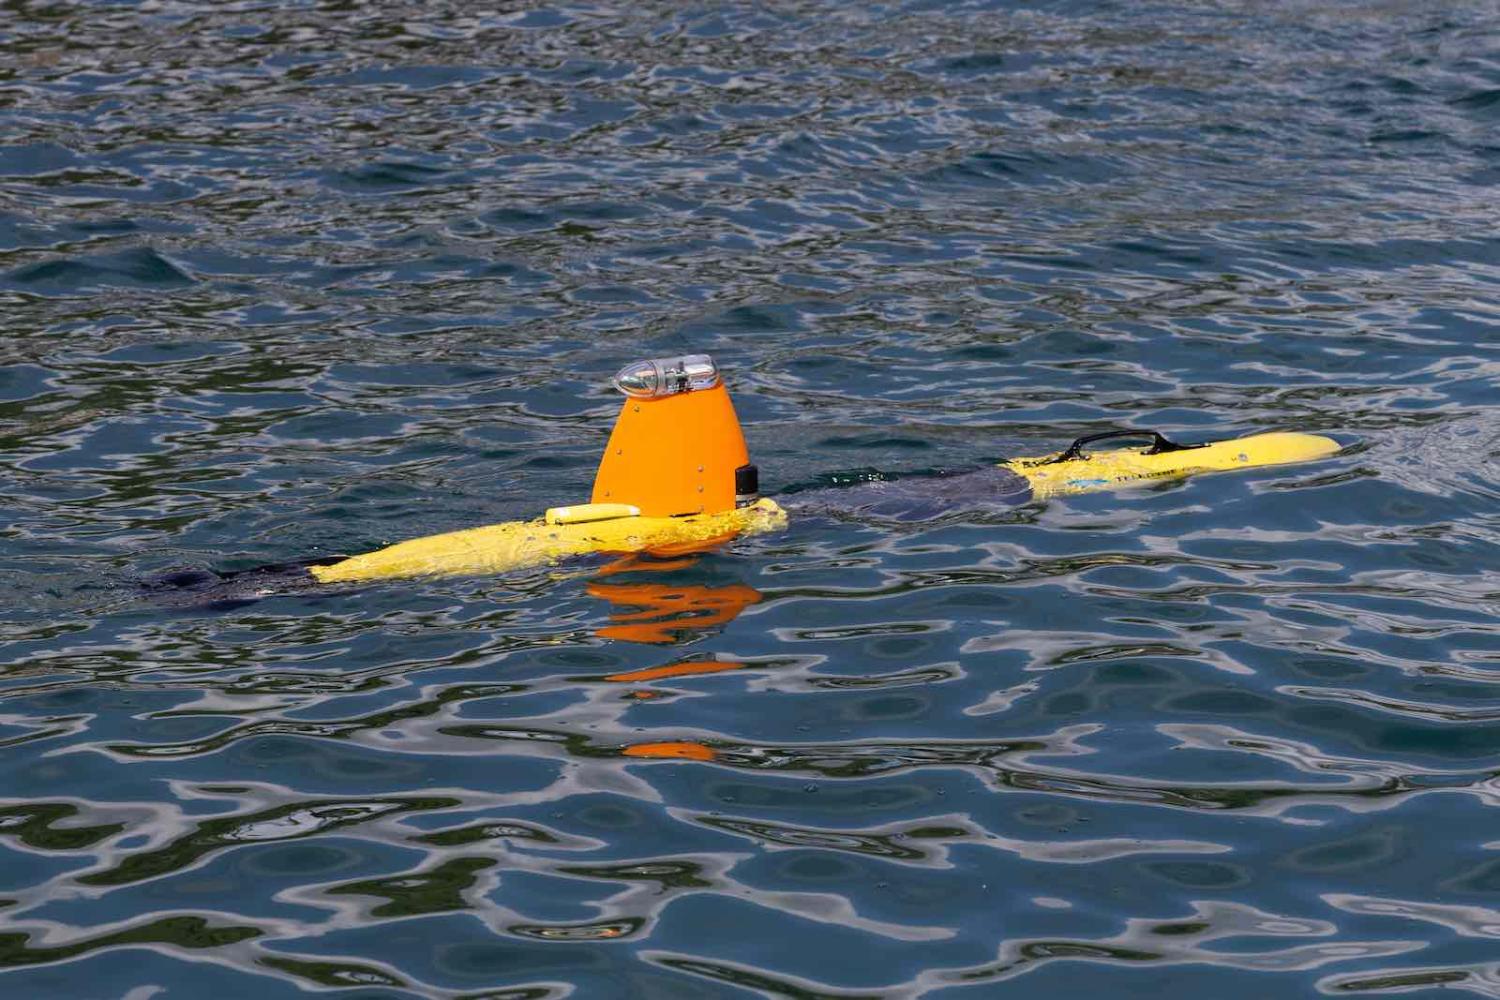 The Gavia Autonomous Underwater Vehicle, remotely piloted by the Australian Mine Warfare Team (Department of Defence)